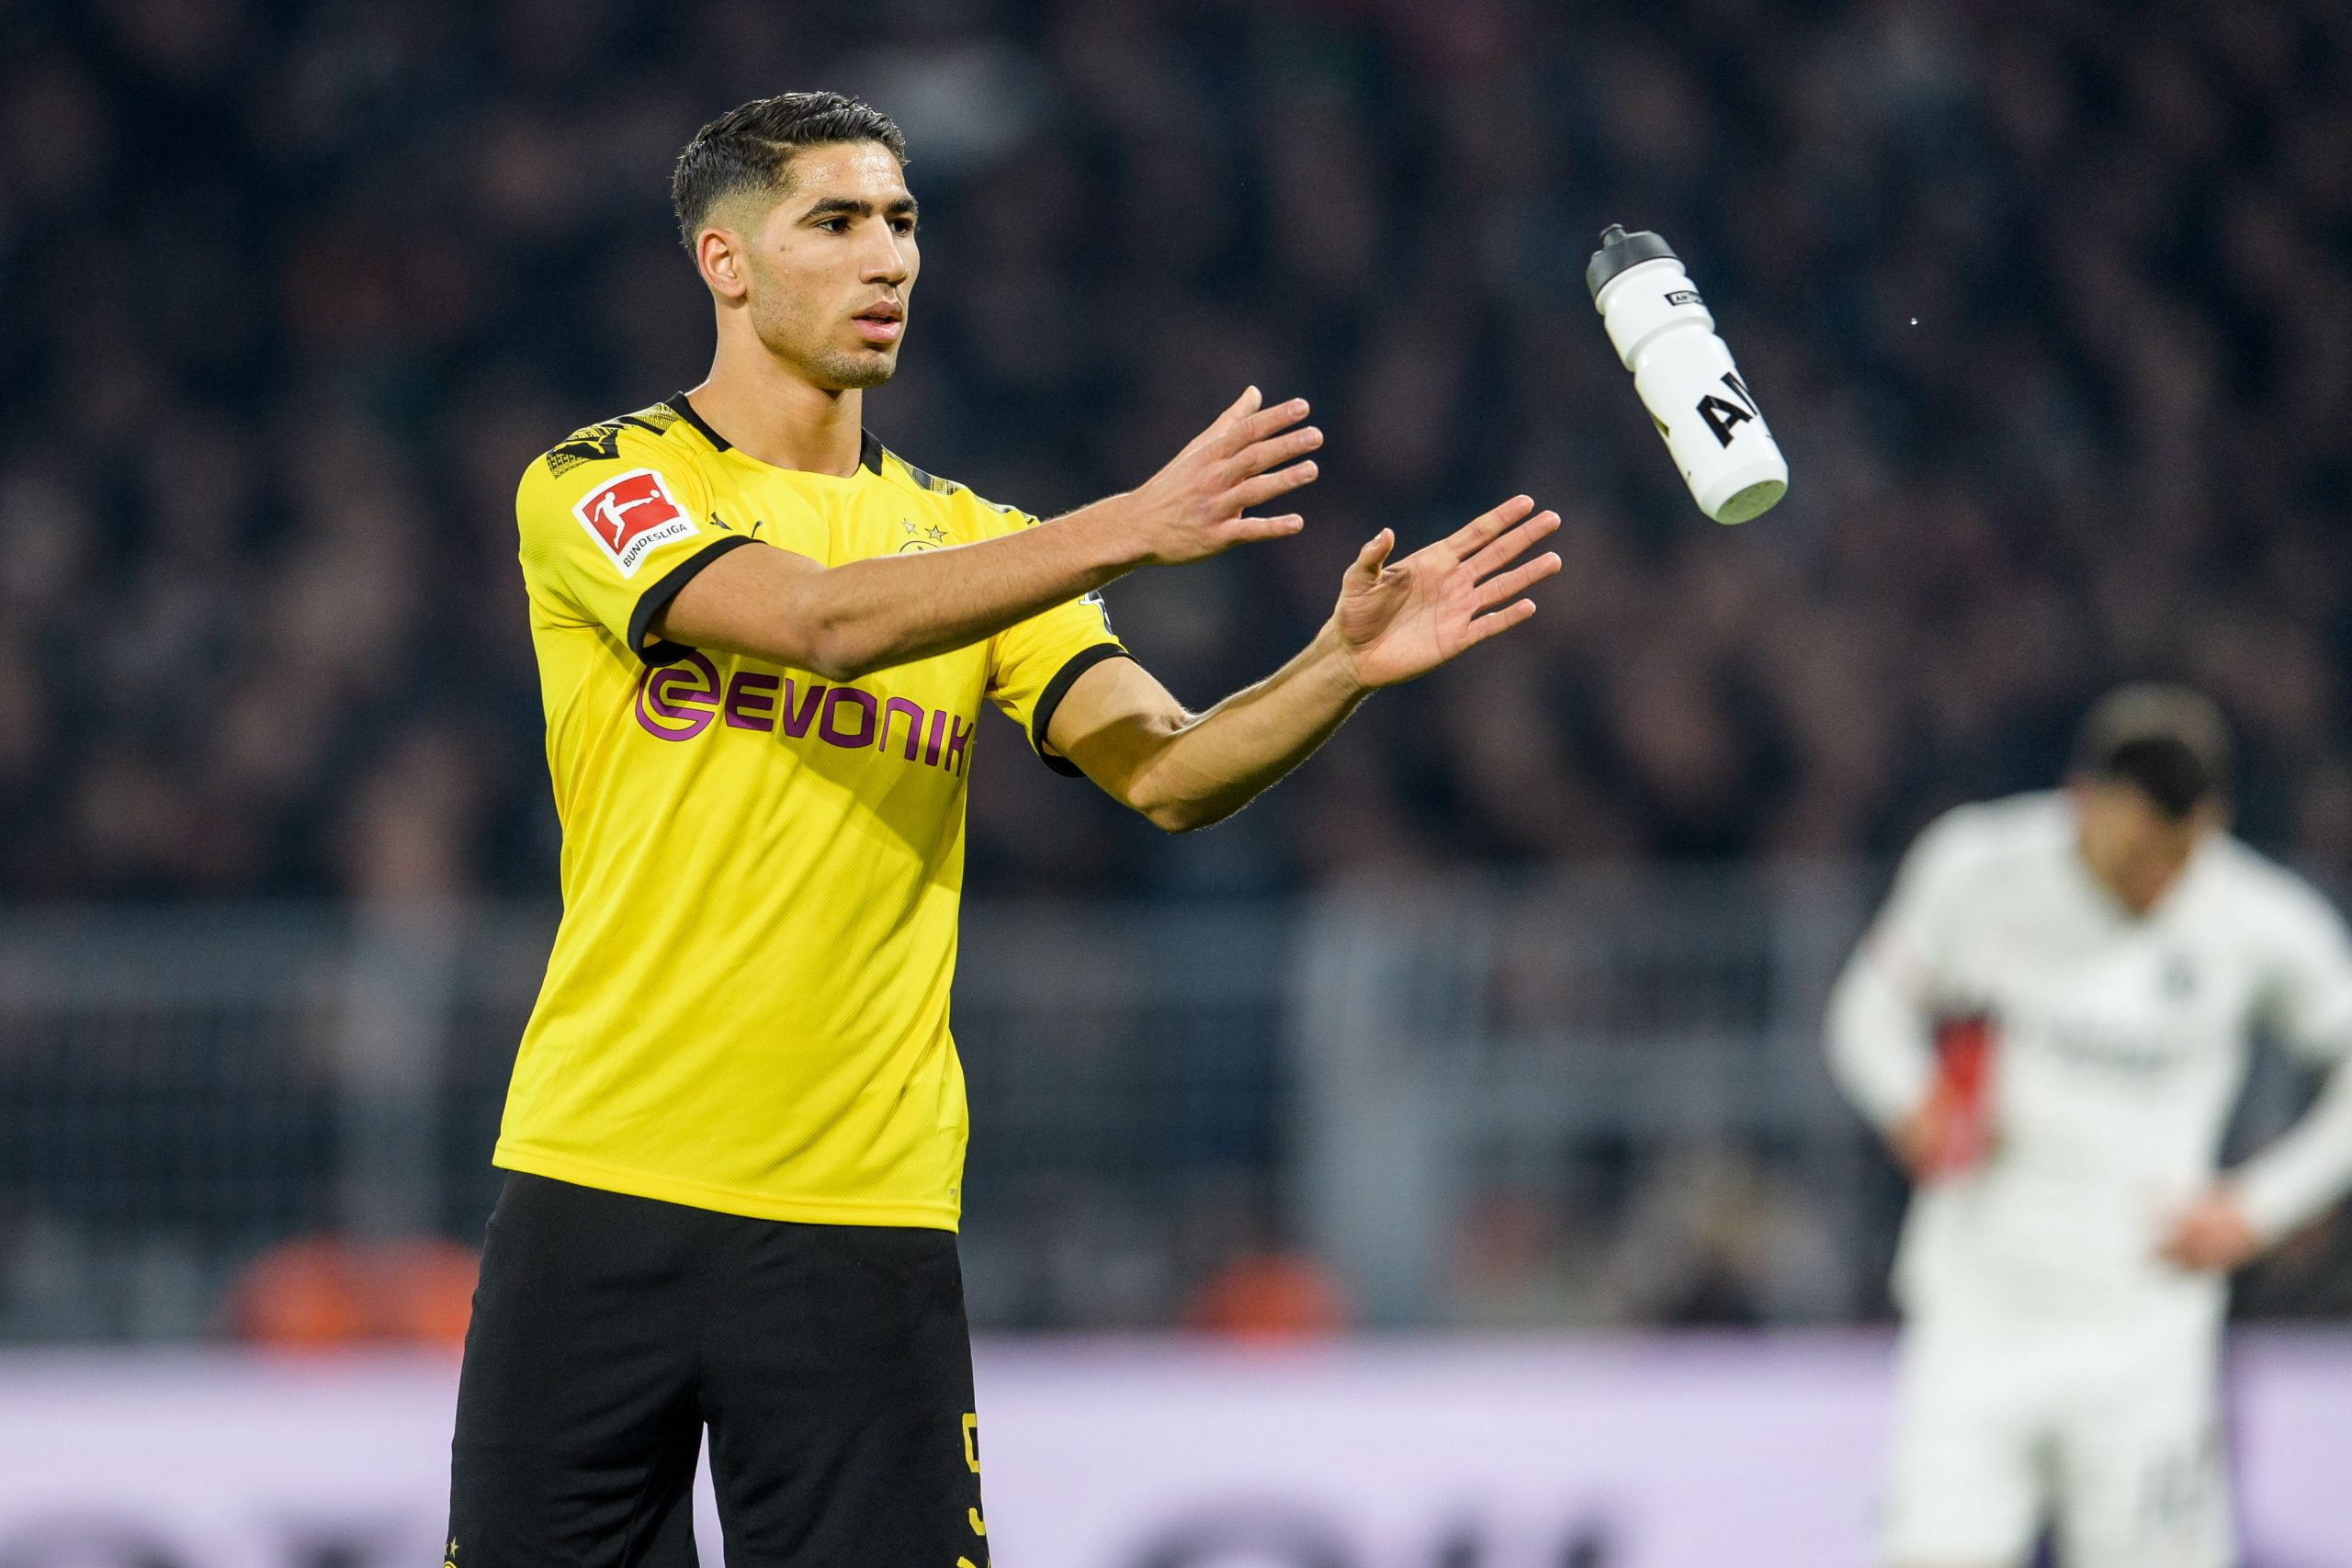 Manchester City keeping a keen aye on Achraf Hakimi who is seen in the photo